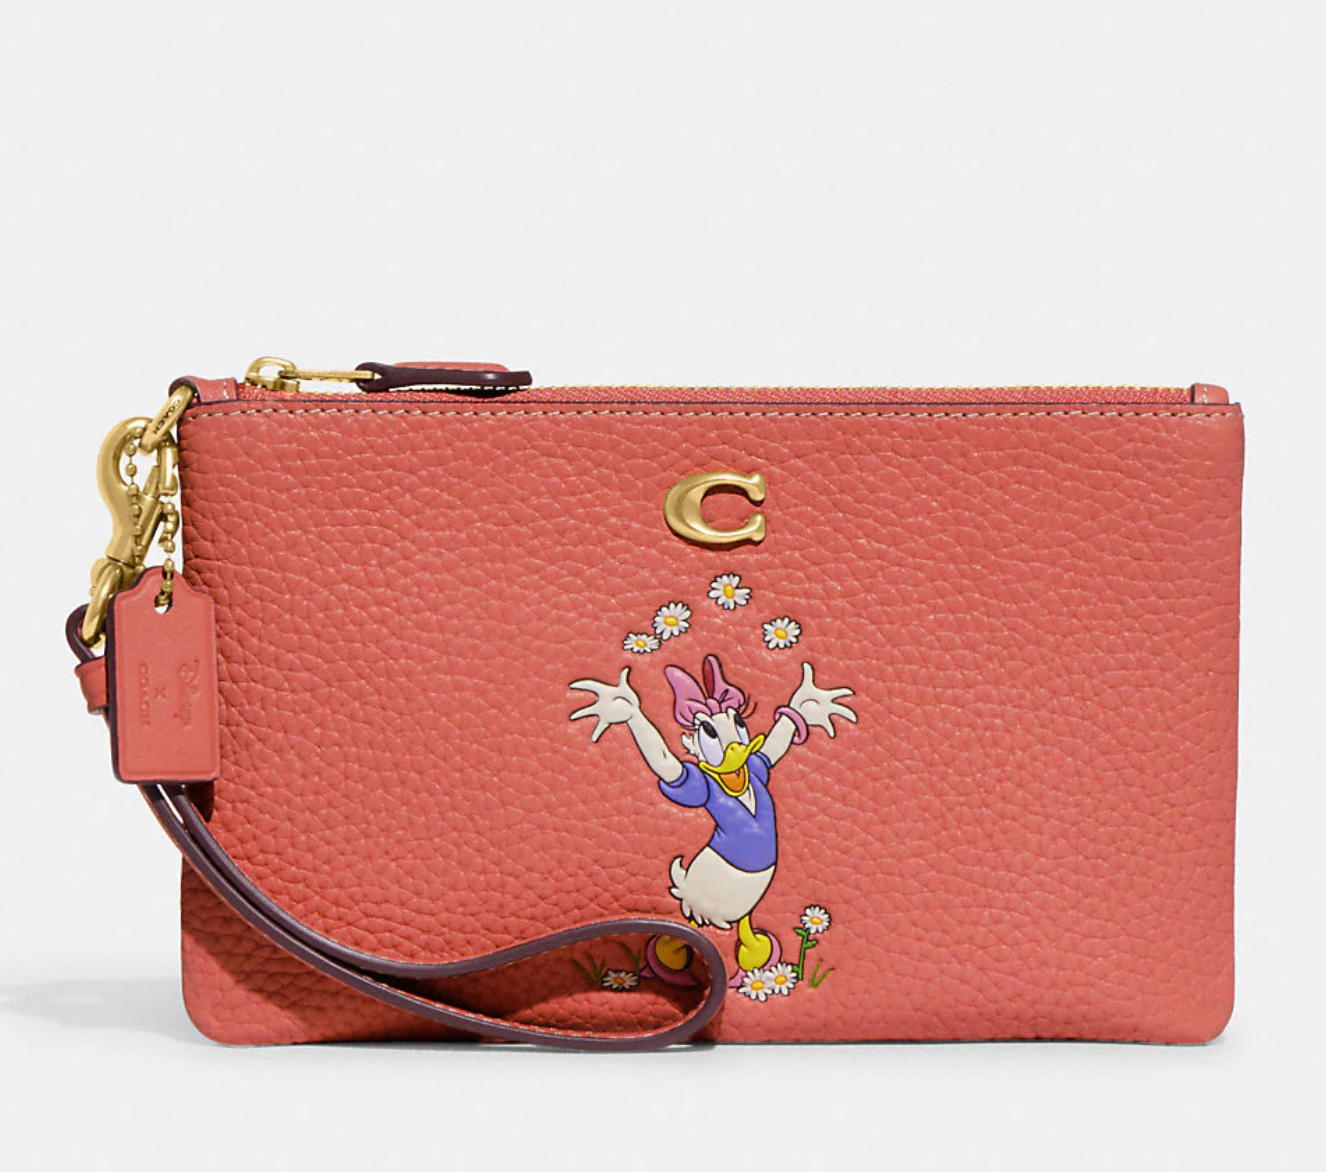 Coach Celebrates 100 Years of Disney With New Collection of